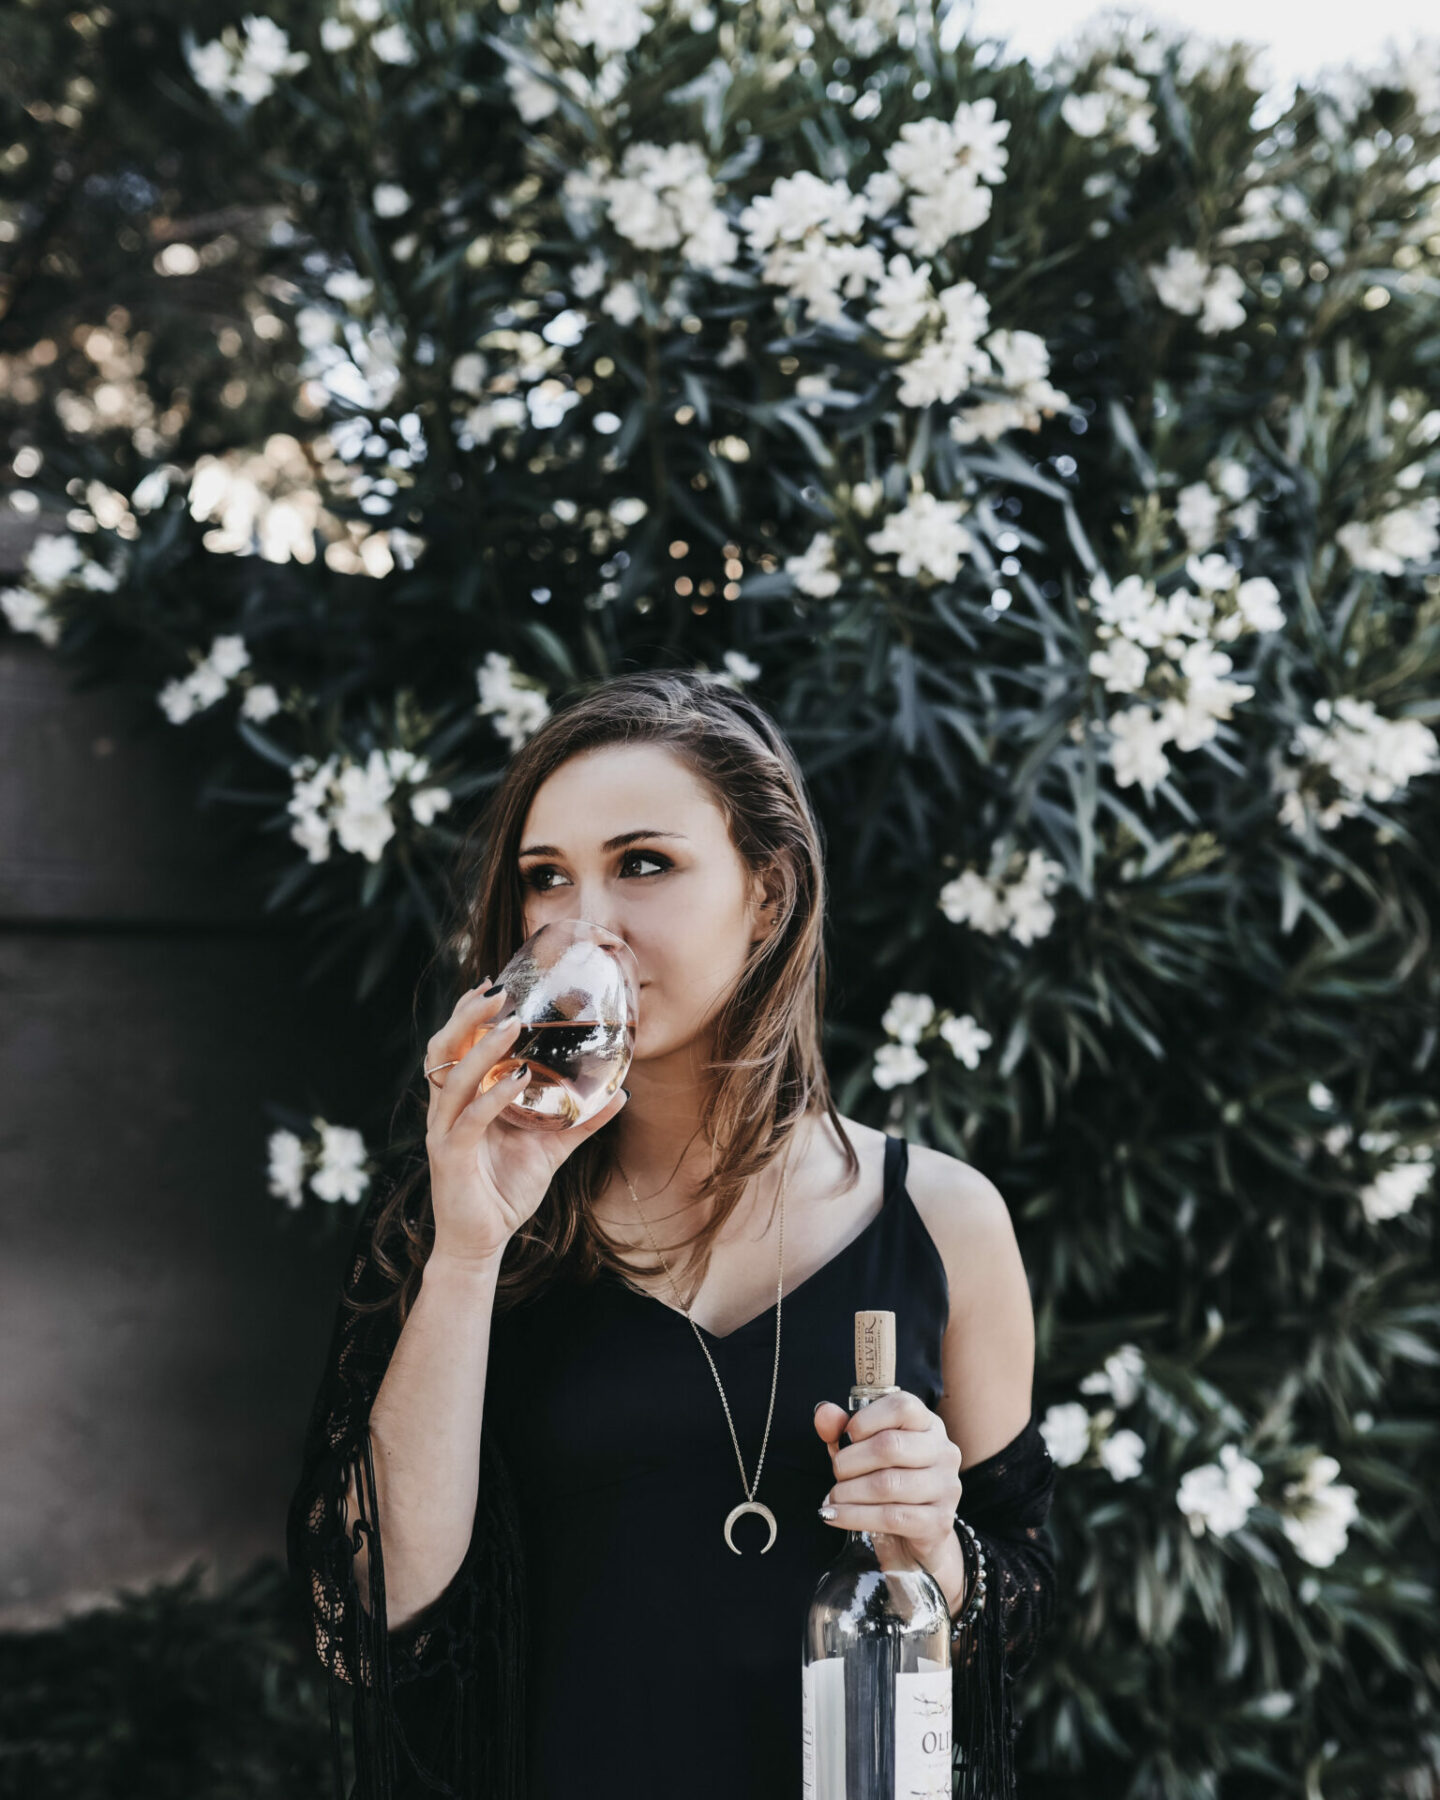 Paige sipping rose in front of flowers